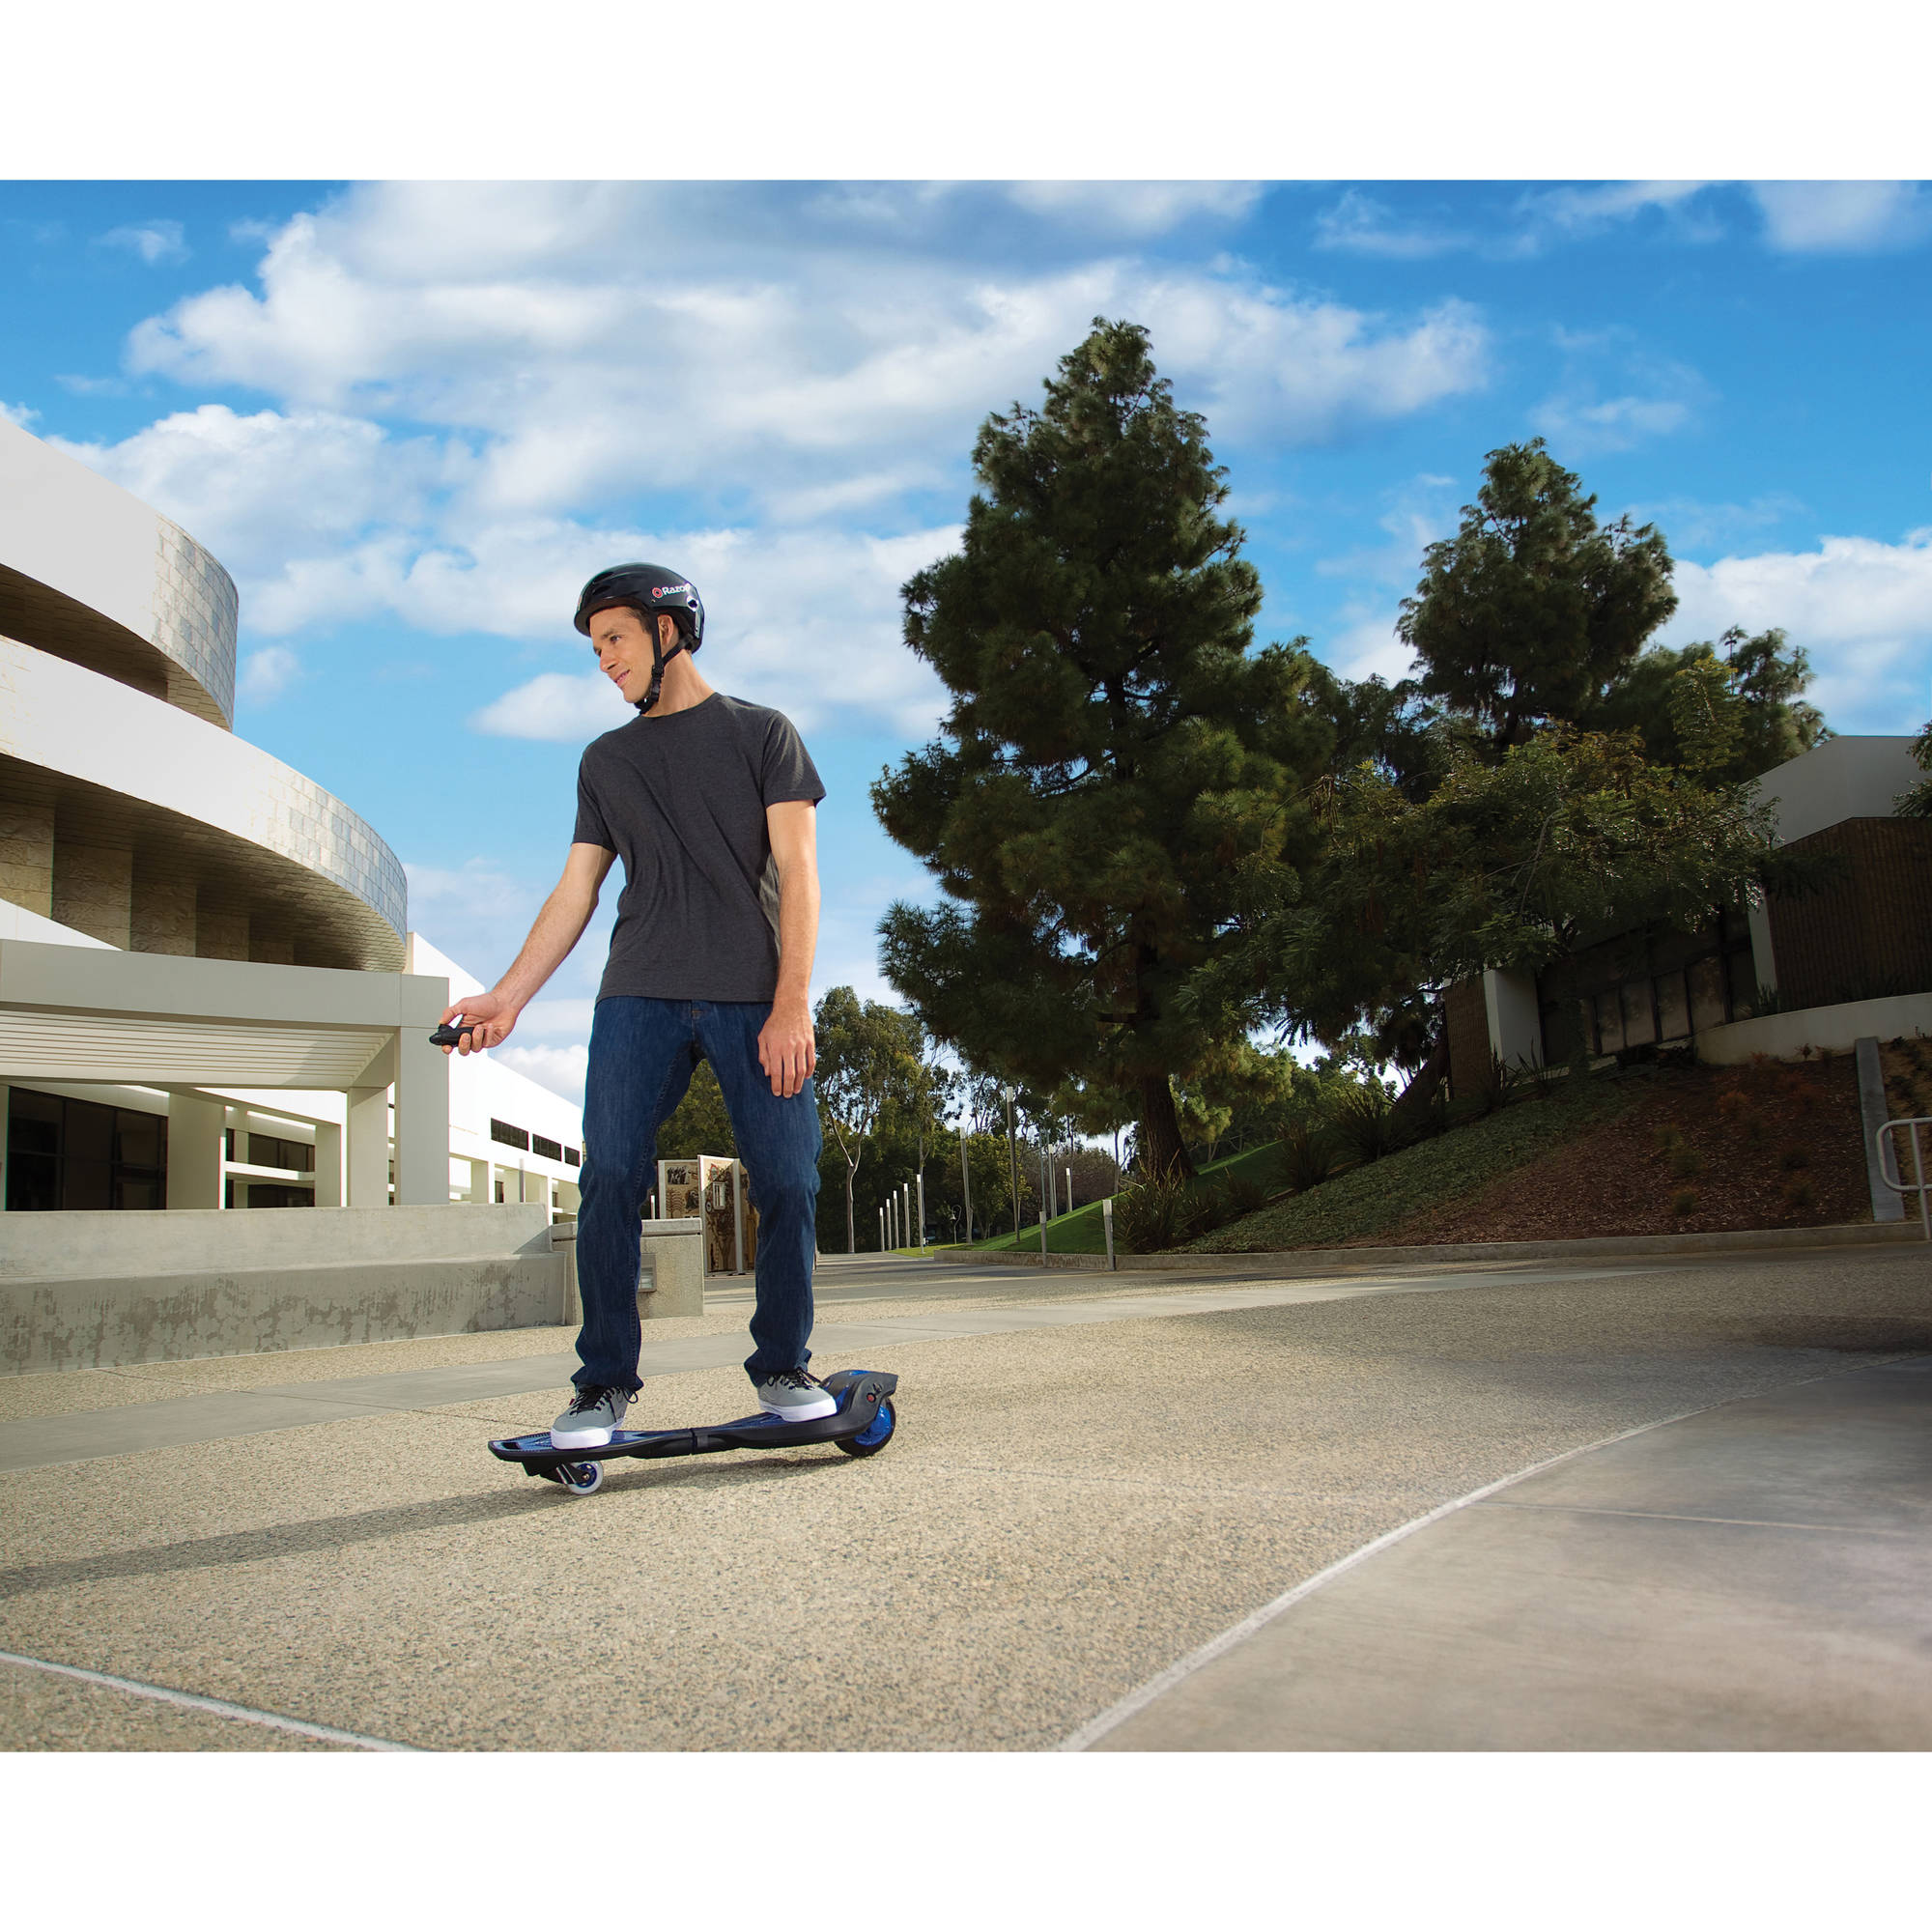 Razor RipStik Electric Caster Board with Power Core Technology and Wireless Remote, Blue - image 11 of 13